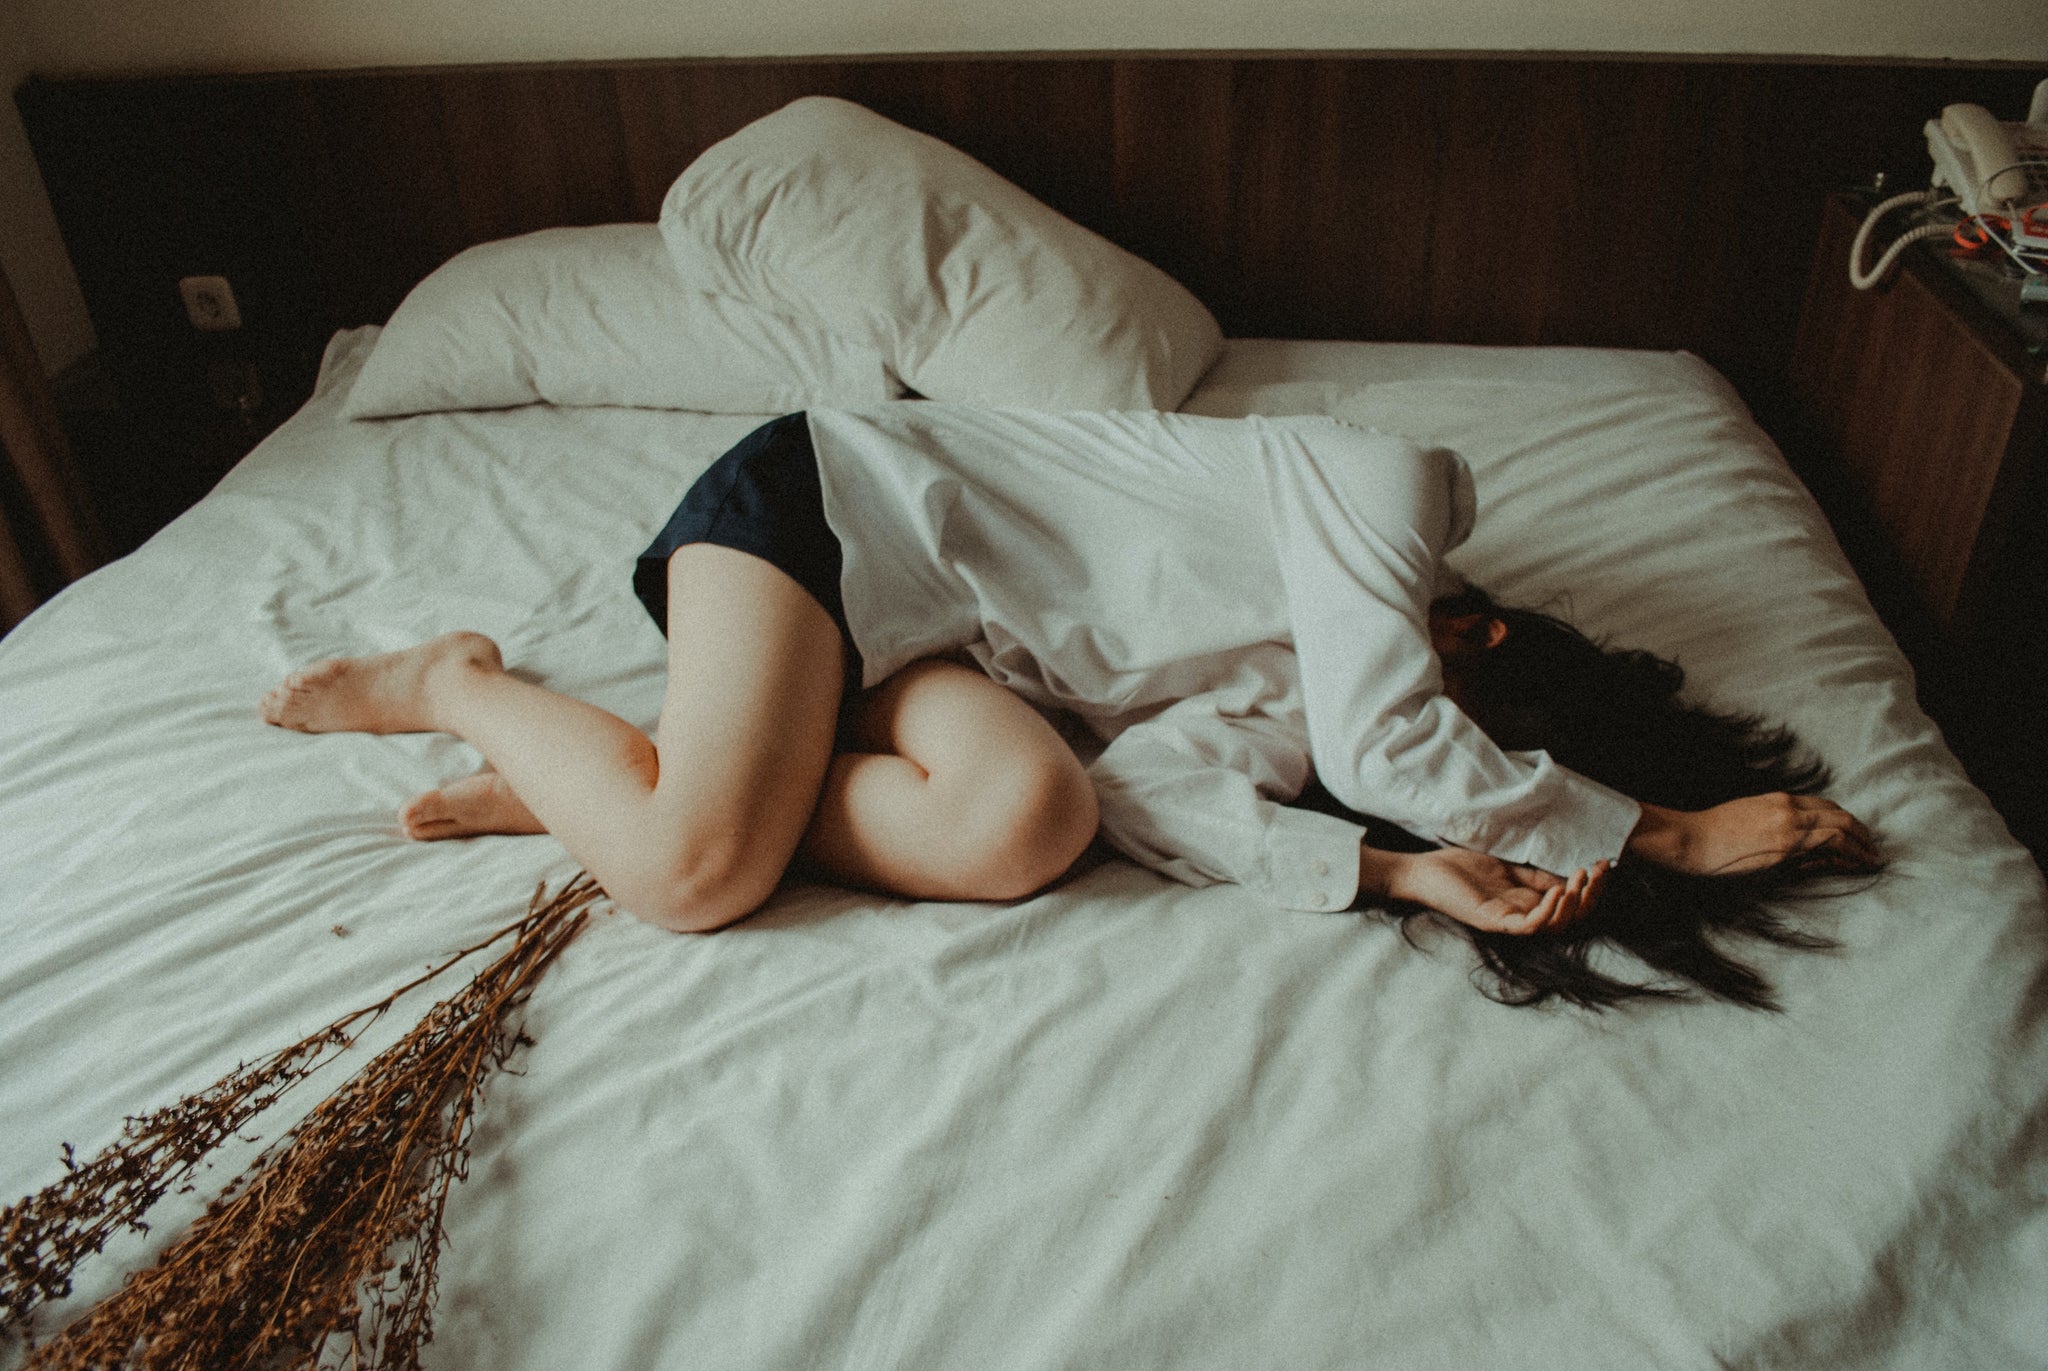 How To Make Your Period End Faster: 10 Top Tips